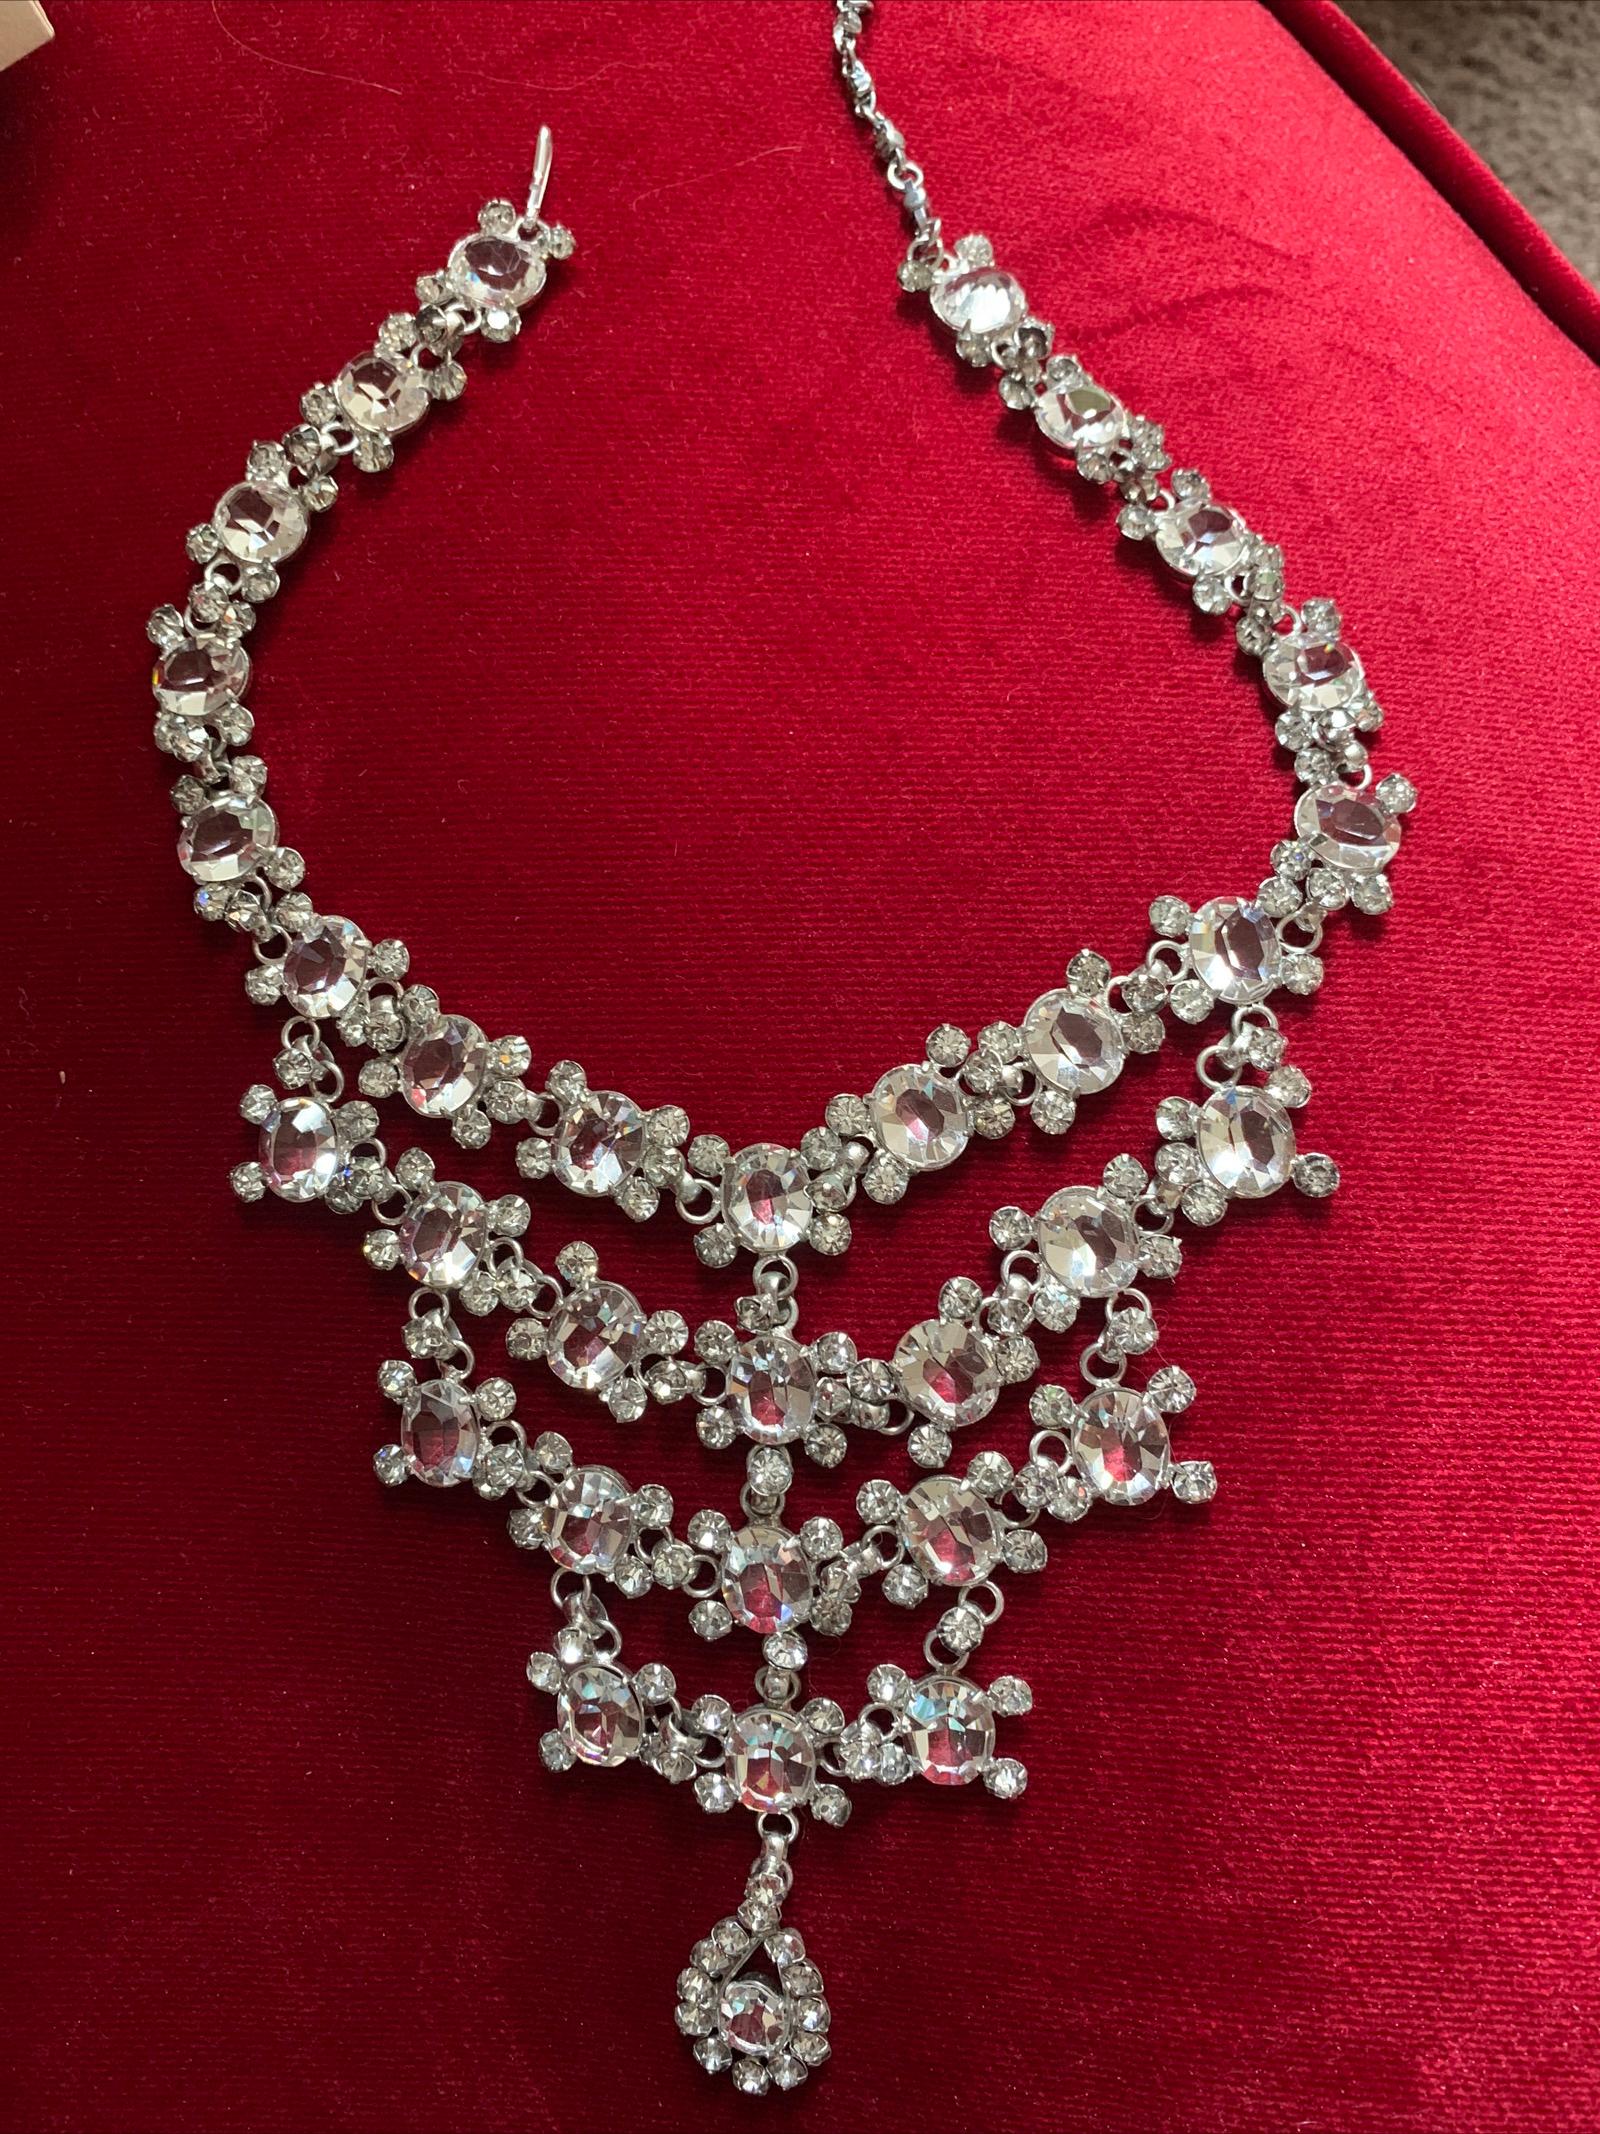 
Stand out in the crowd with this Incredible RARE Vintage Huge Open Back Rhinestone Bib Necklace 1950s.
Absolutely stunning piece 
Vintage from 1950s era .
Hook fastening with extender chain .
Stunning diamanté glass crystals , all original and